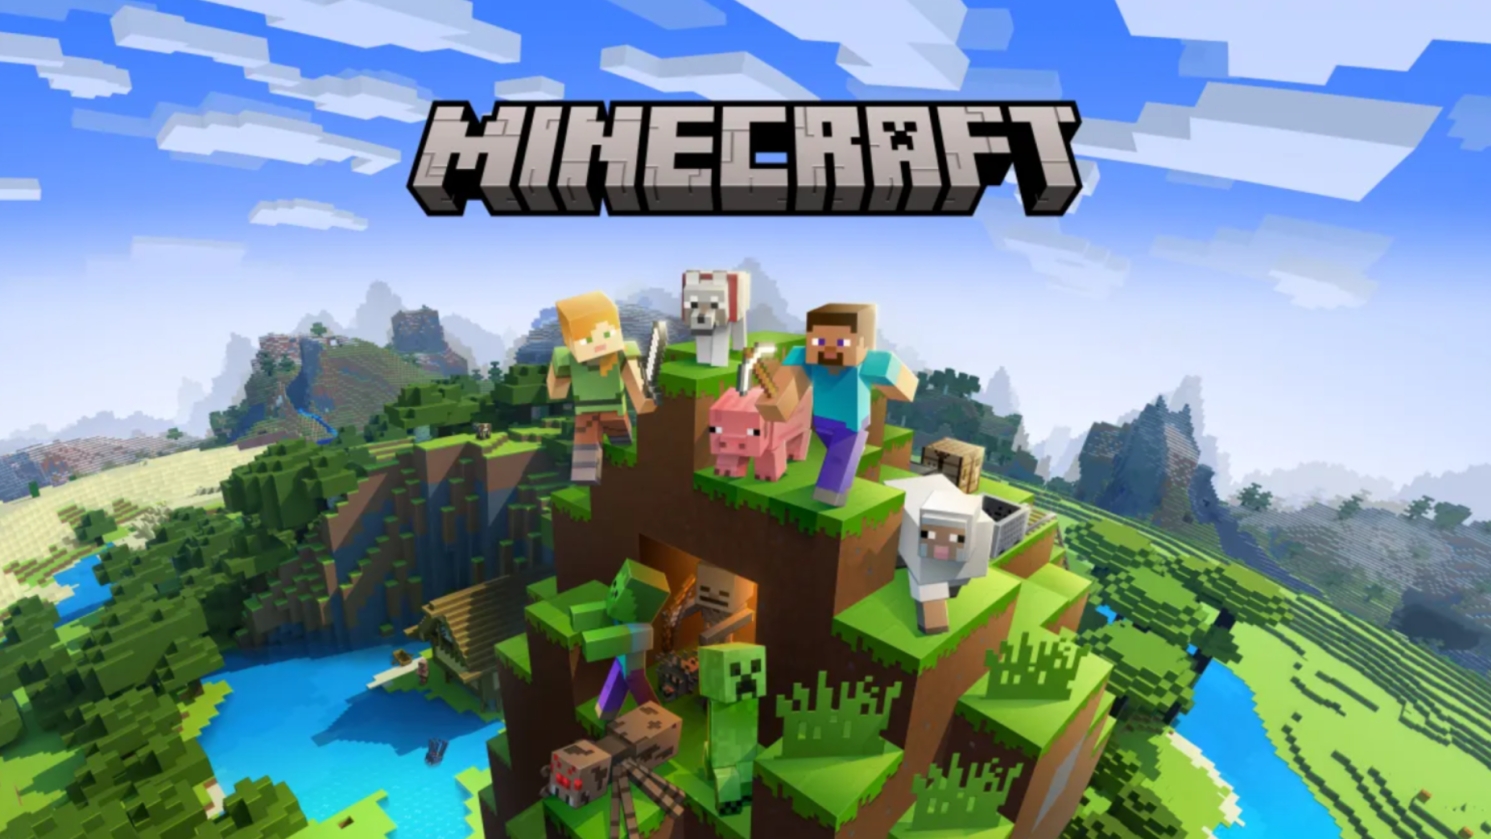 Minecraft earned four times as much revenue on Switch compared to Xbox